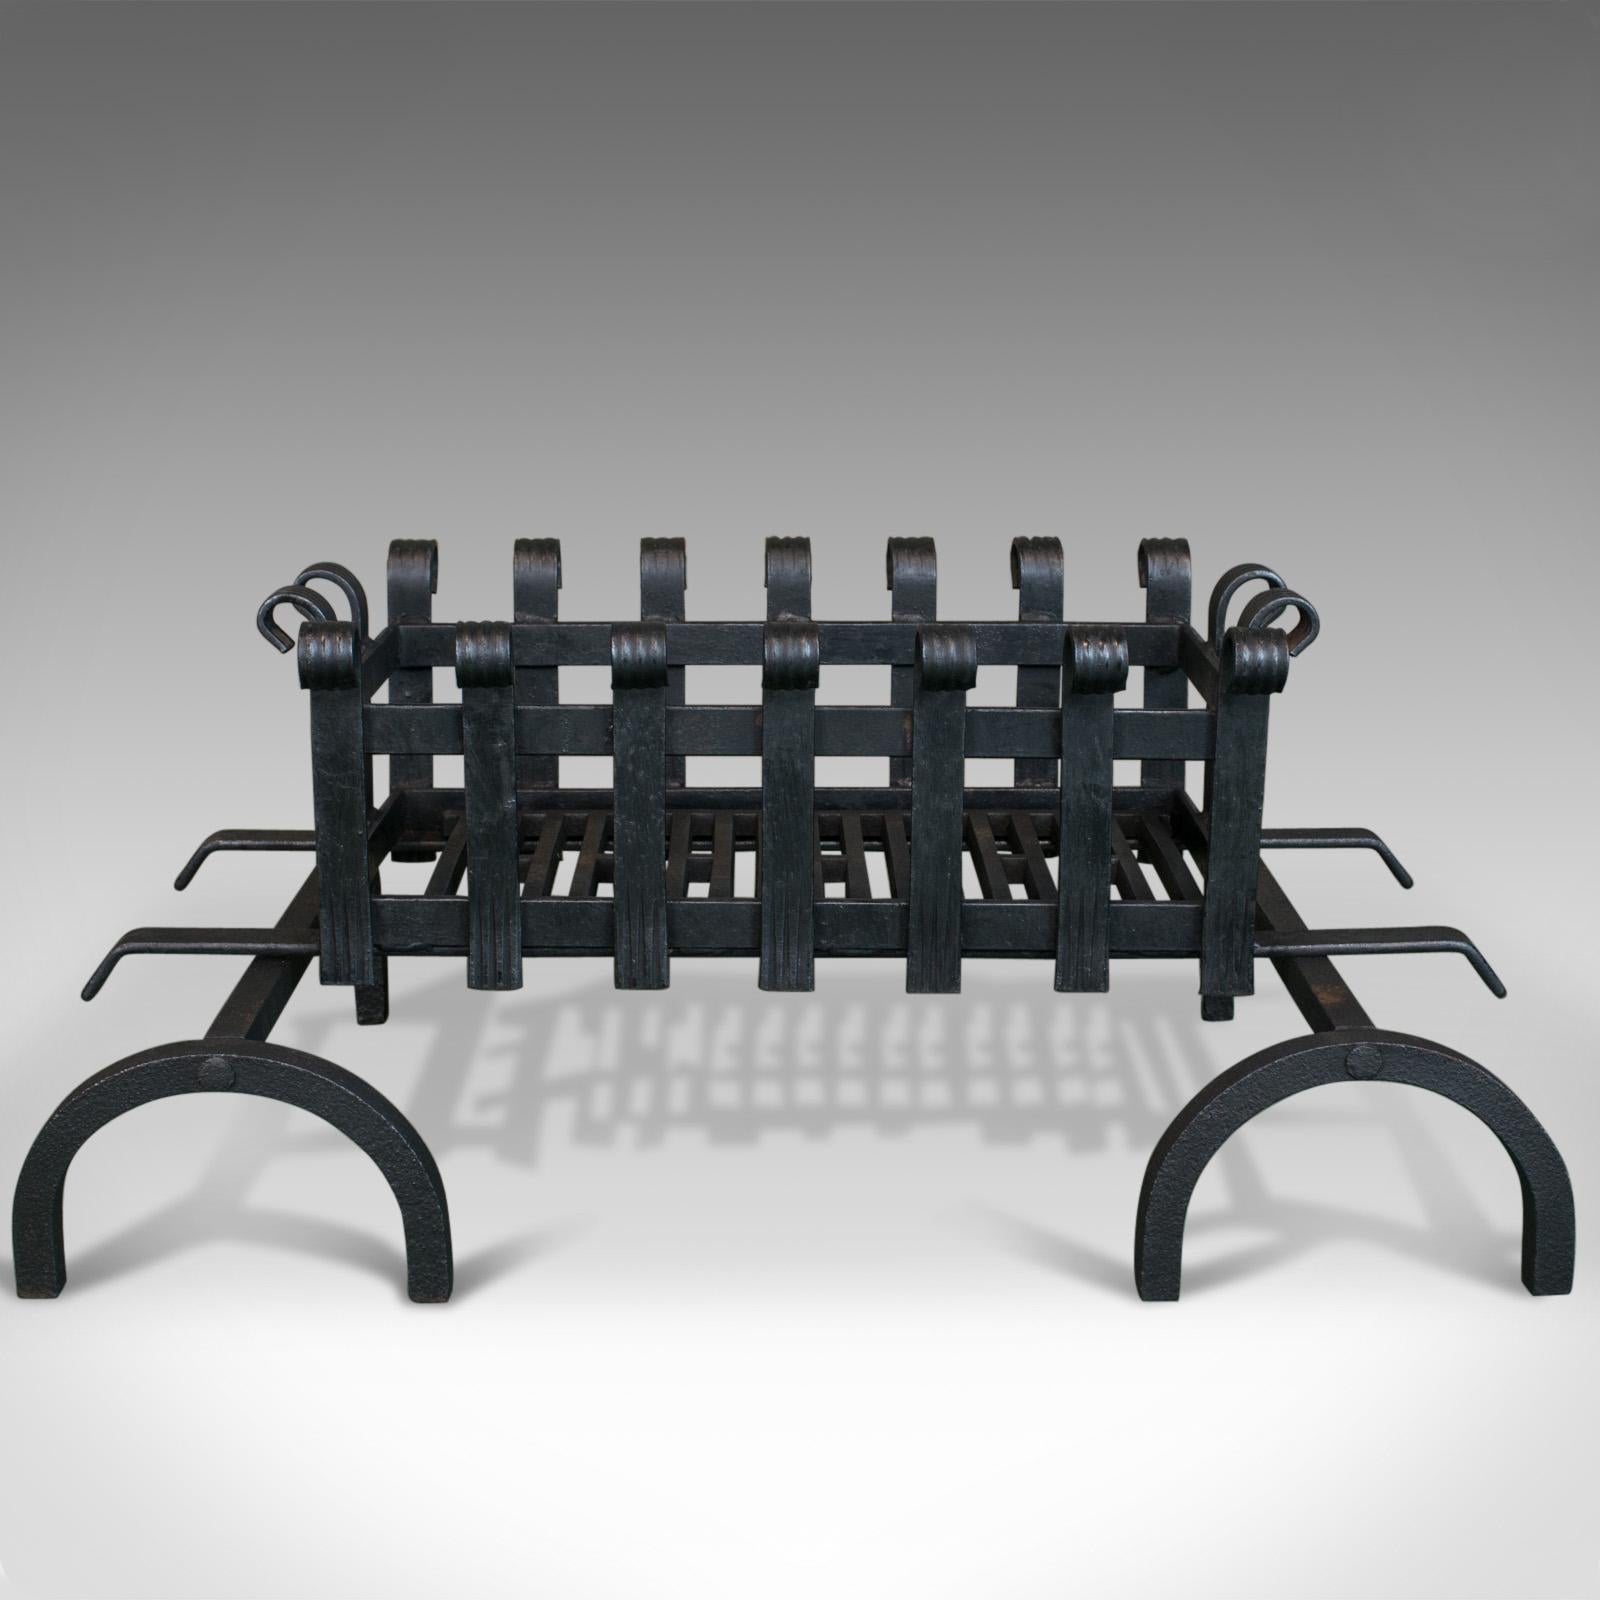 This is a vintage fire basket sitting on a pair of andirons. An English, iron fire grate dating to the mid-20th century.

A quality fire basket resting above a sturdy pair of fire dogs
Hand forged iron grate and basket
Charming hoop andiron legs